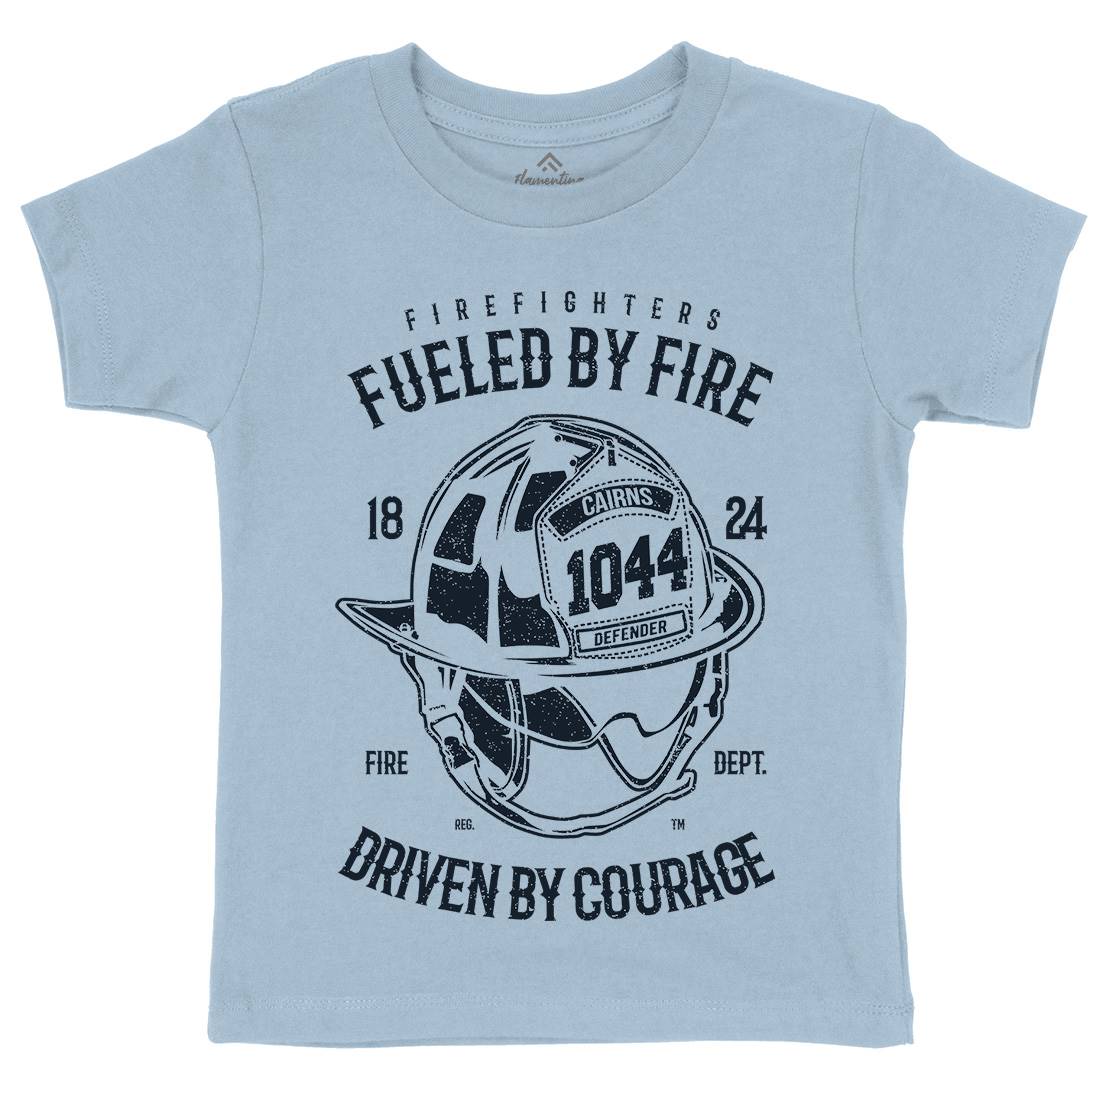 Fuelled By Fire Kids Crew Neck T-Shirt Firefighters A667